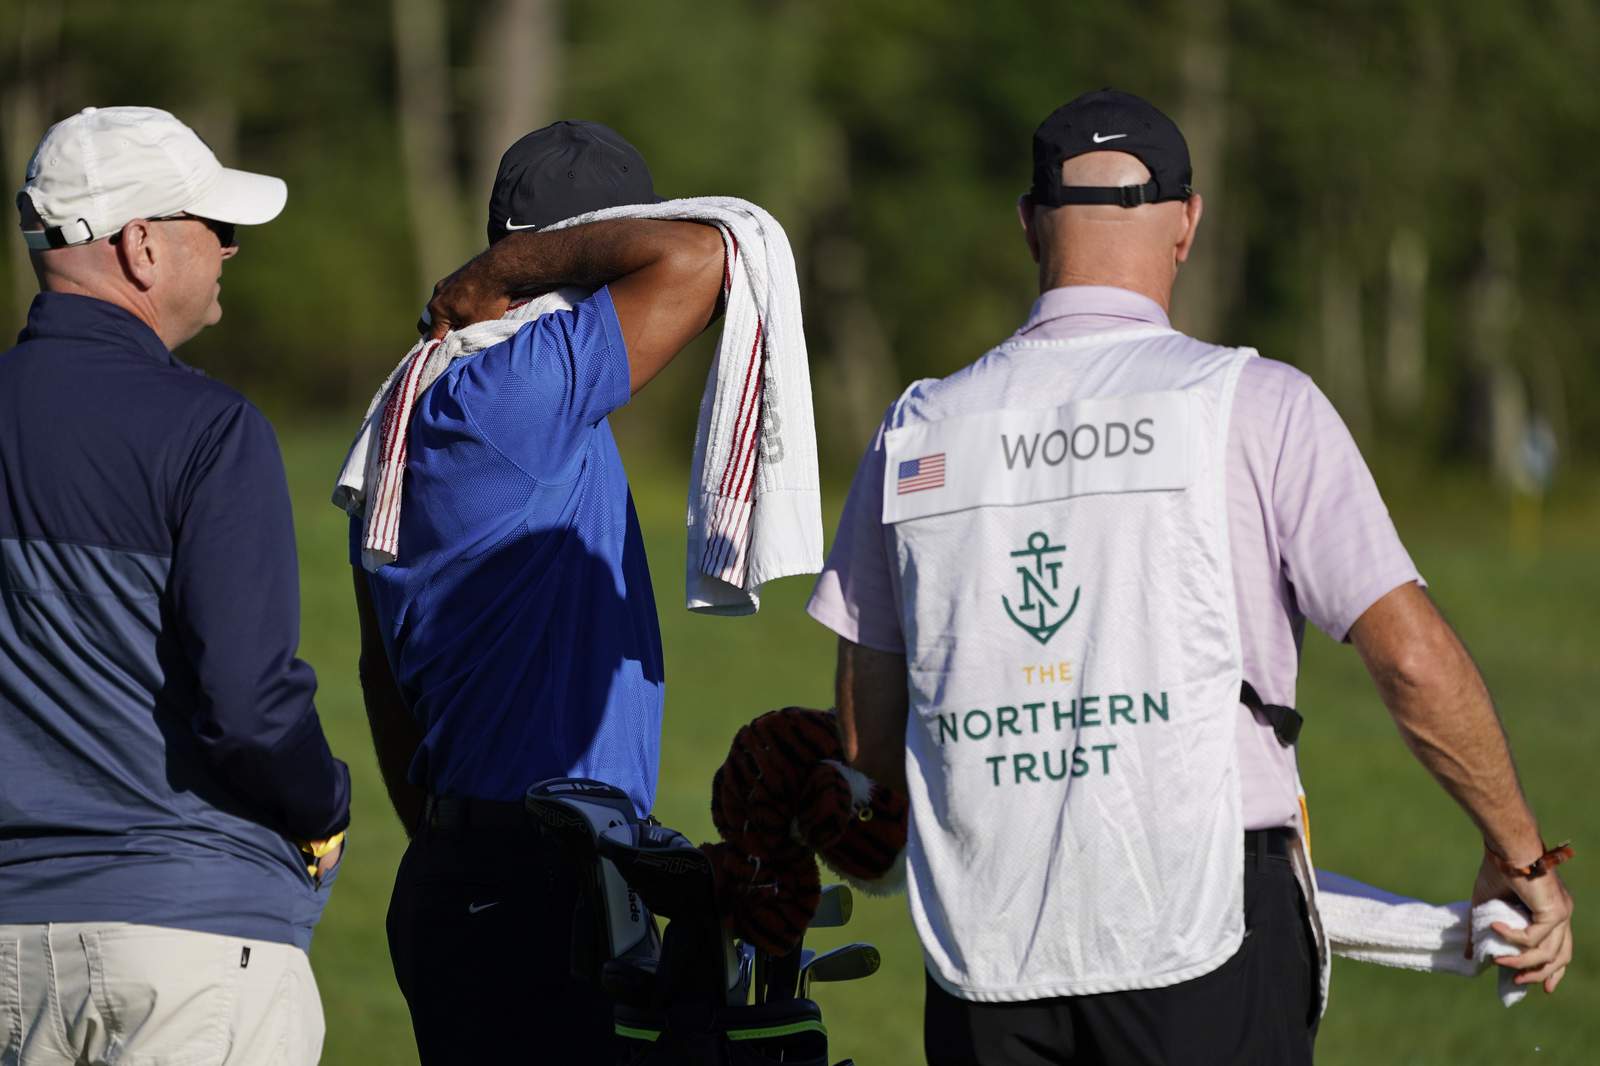 A hot start for Woods in Boston, just not on the golf course